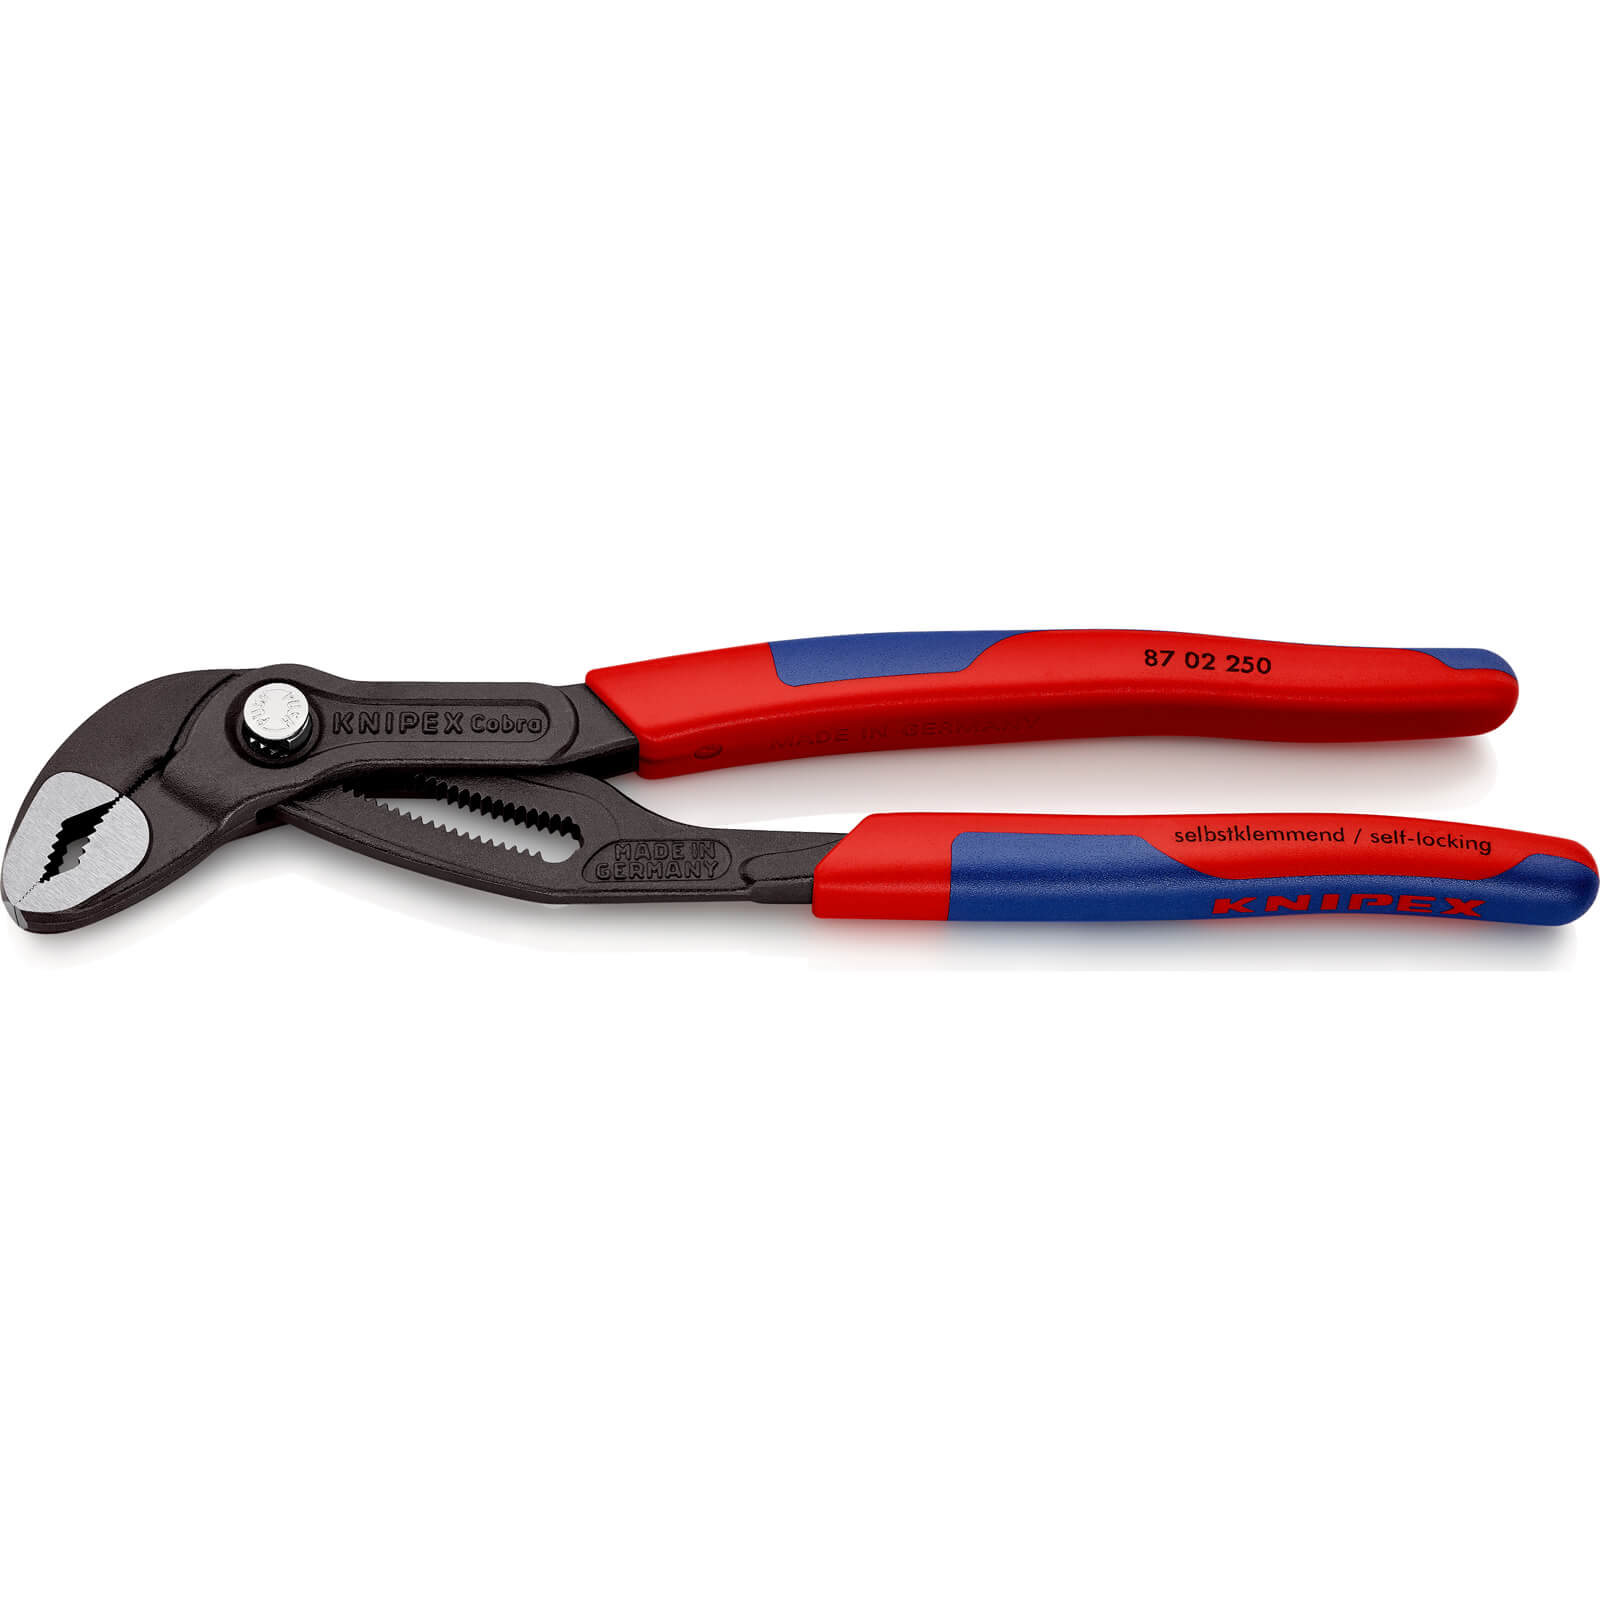 Image of Knipex 87 02 Cobra High Tech Water Pump Pliers 250mm